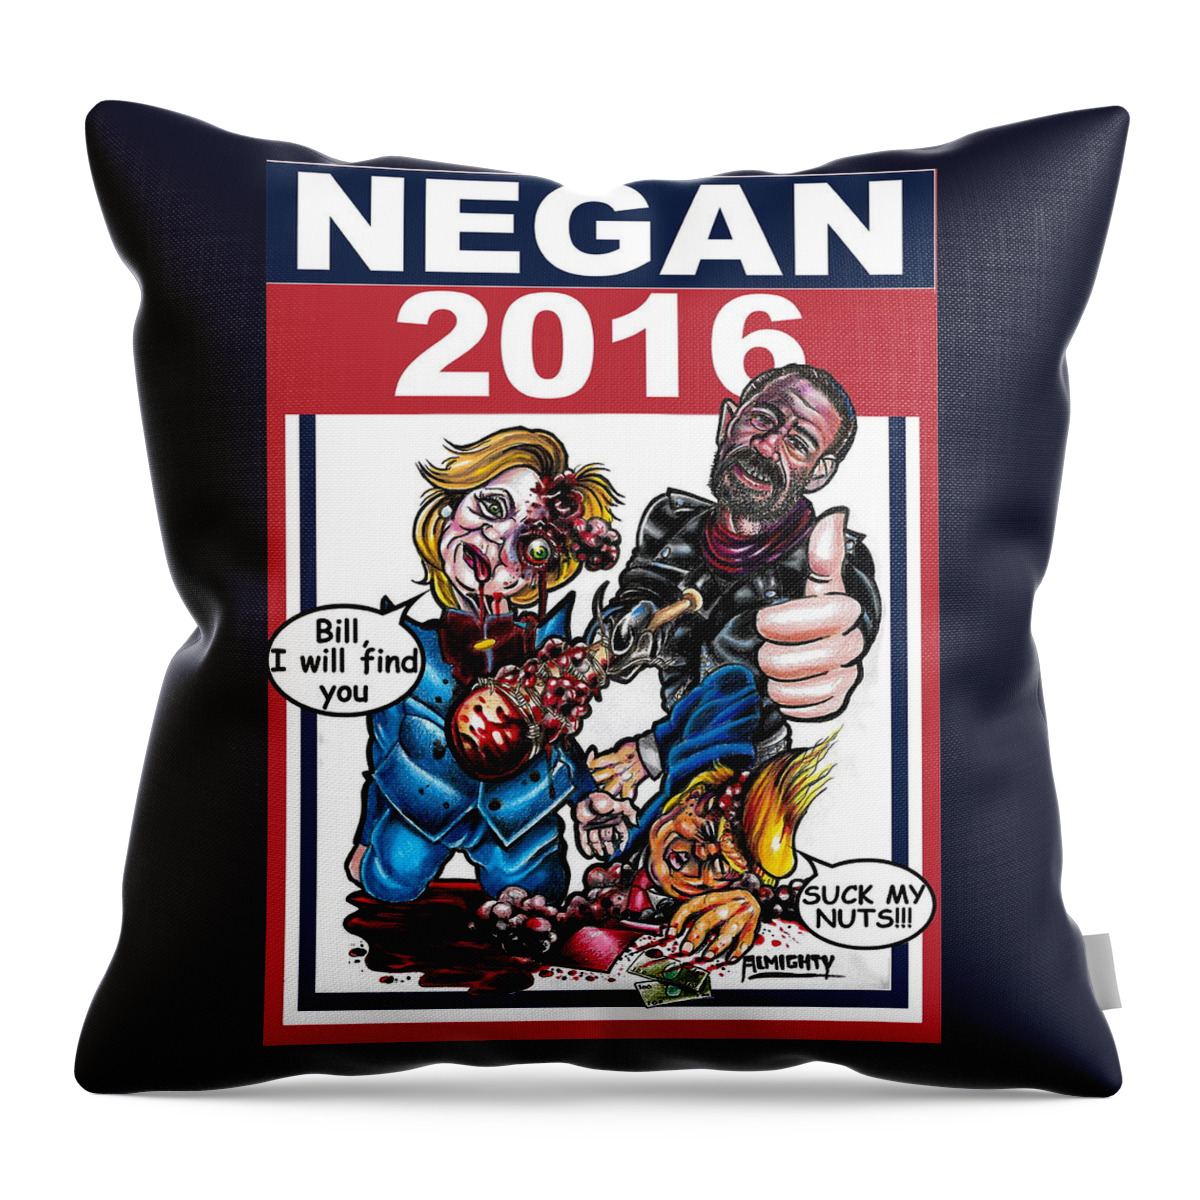 Hillary Throw Pillow featuring the digital art Negan 2016 by Ryan Almighty